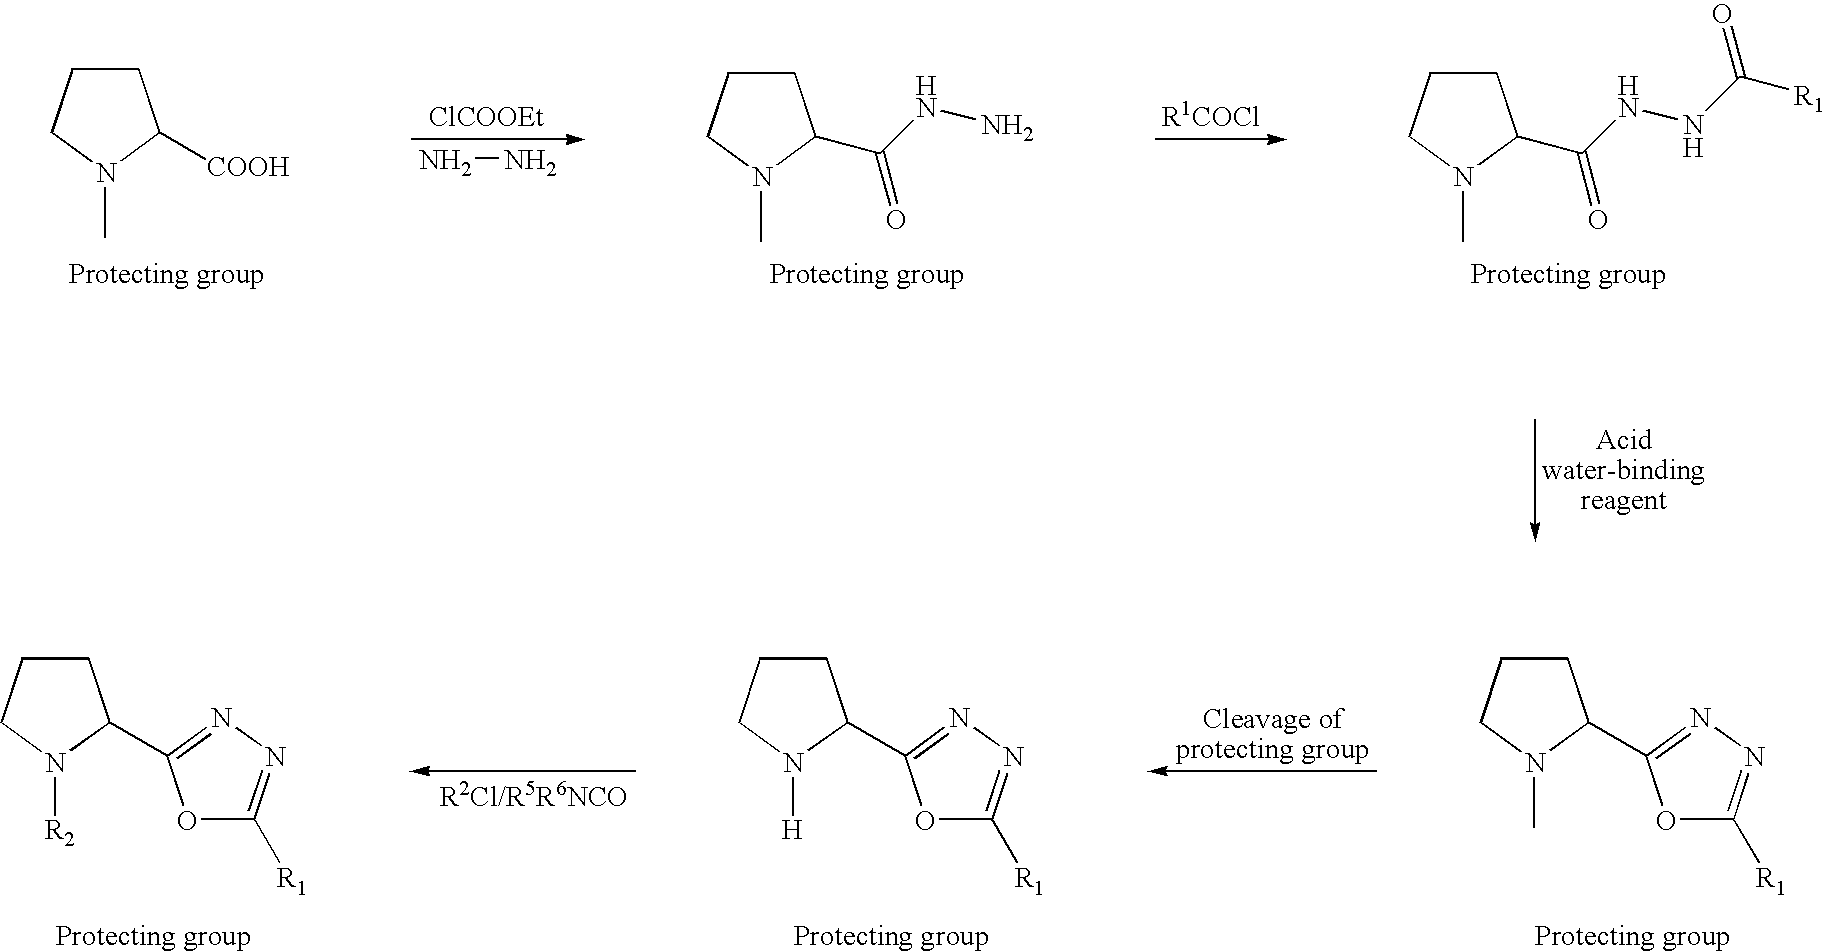 2-pyrrolidin-2-yl-[1,3,4]-oxadiazole compounds and their use as anti-depressants